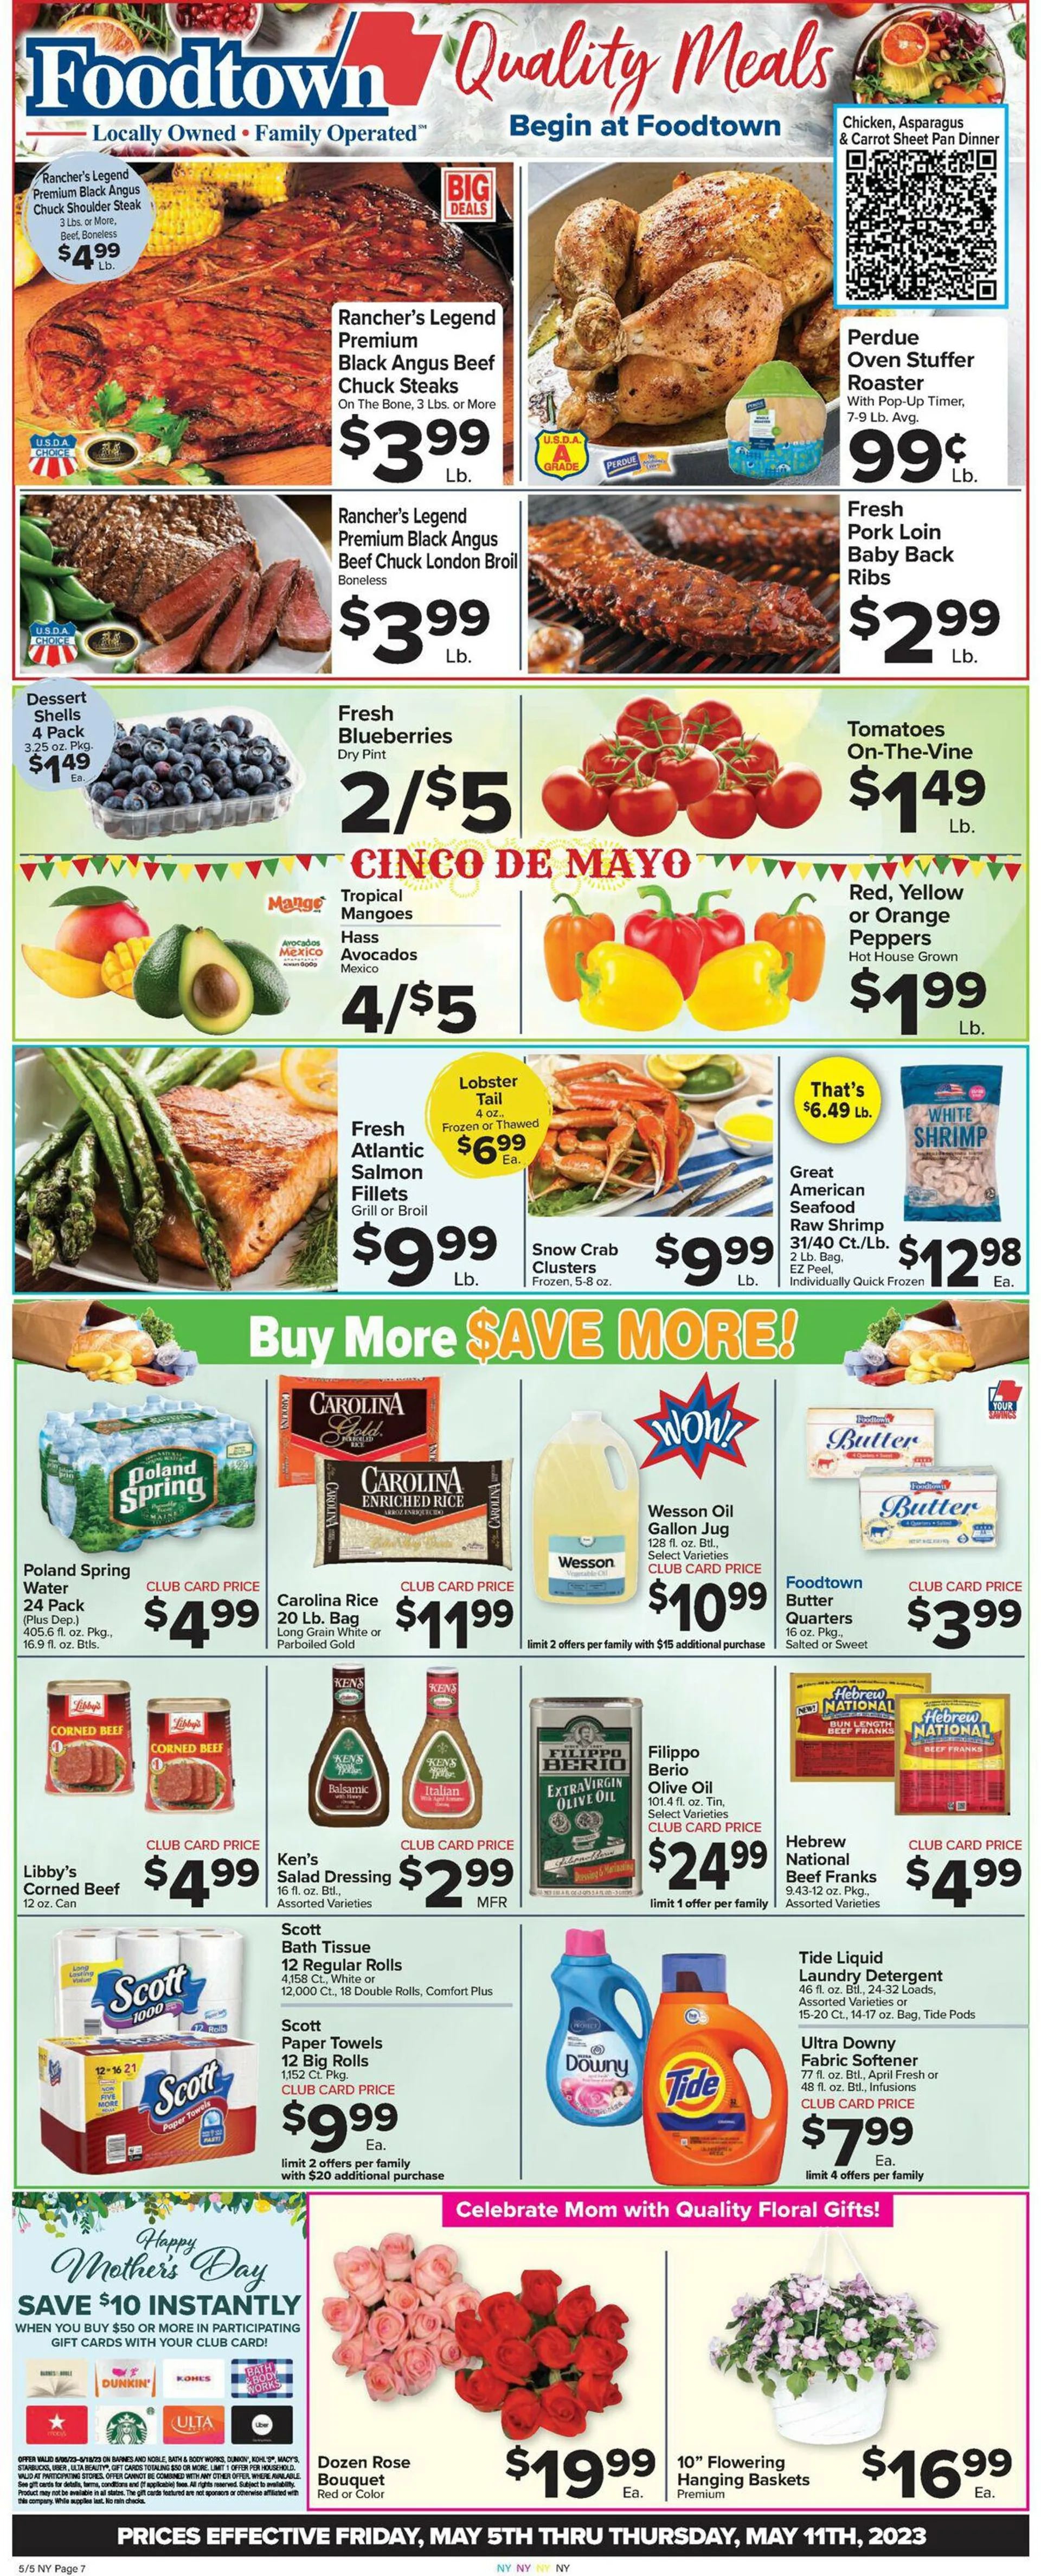 Foodtown Current weekly ad - 1